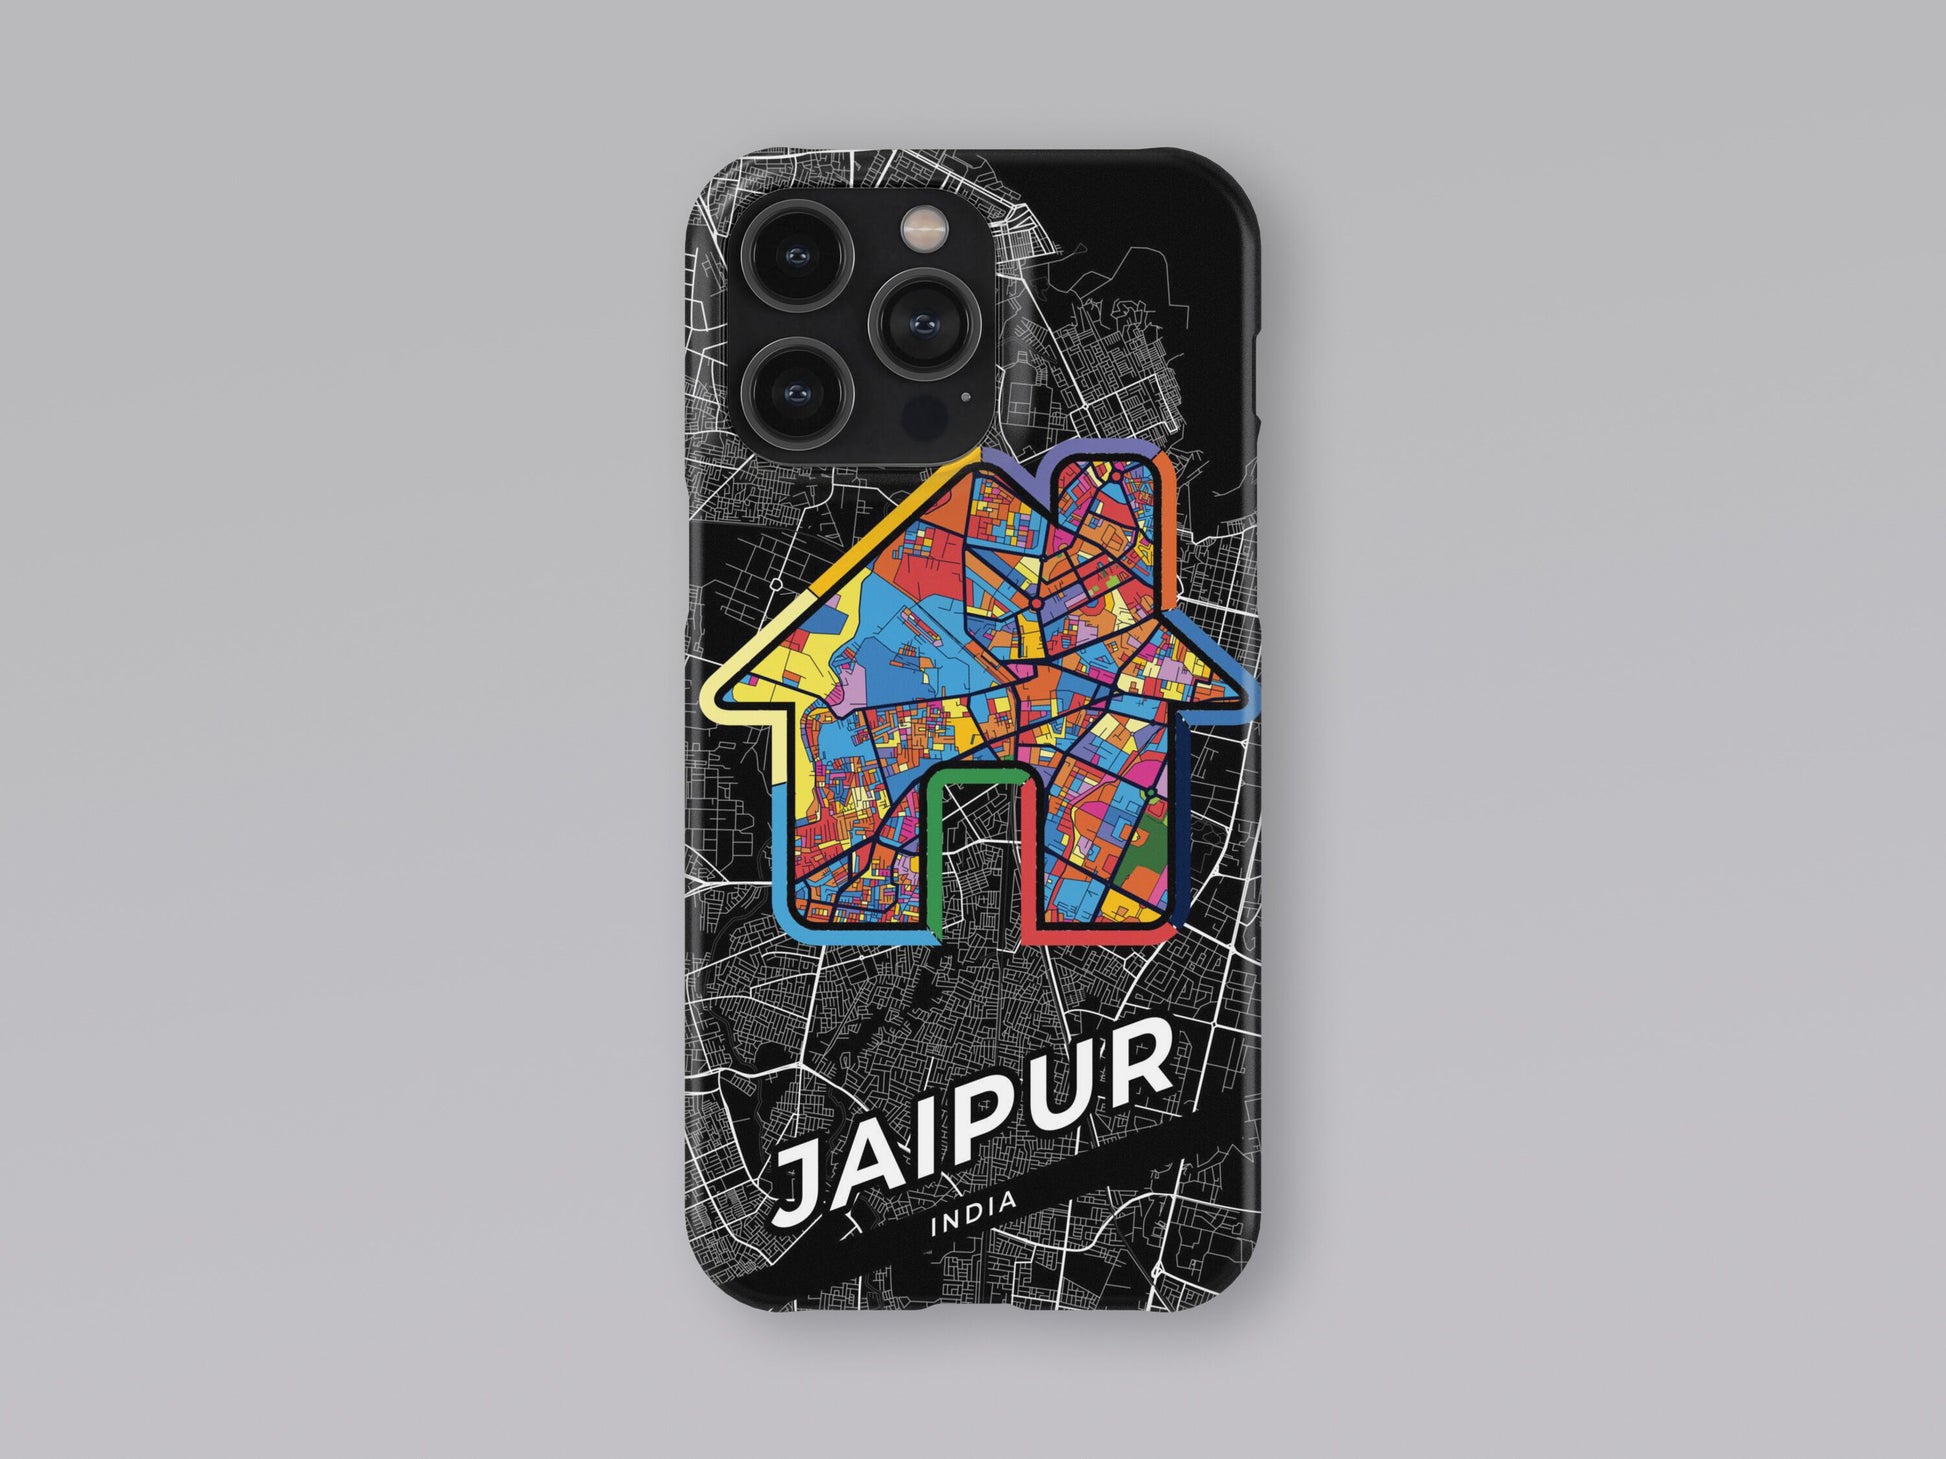 Jaipur India slim phone case with colorful icon. Birthday, wedding or housewarming gift. Couple match cases. 3